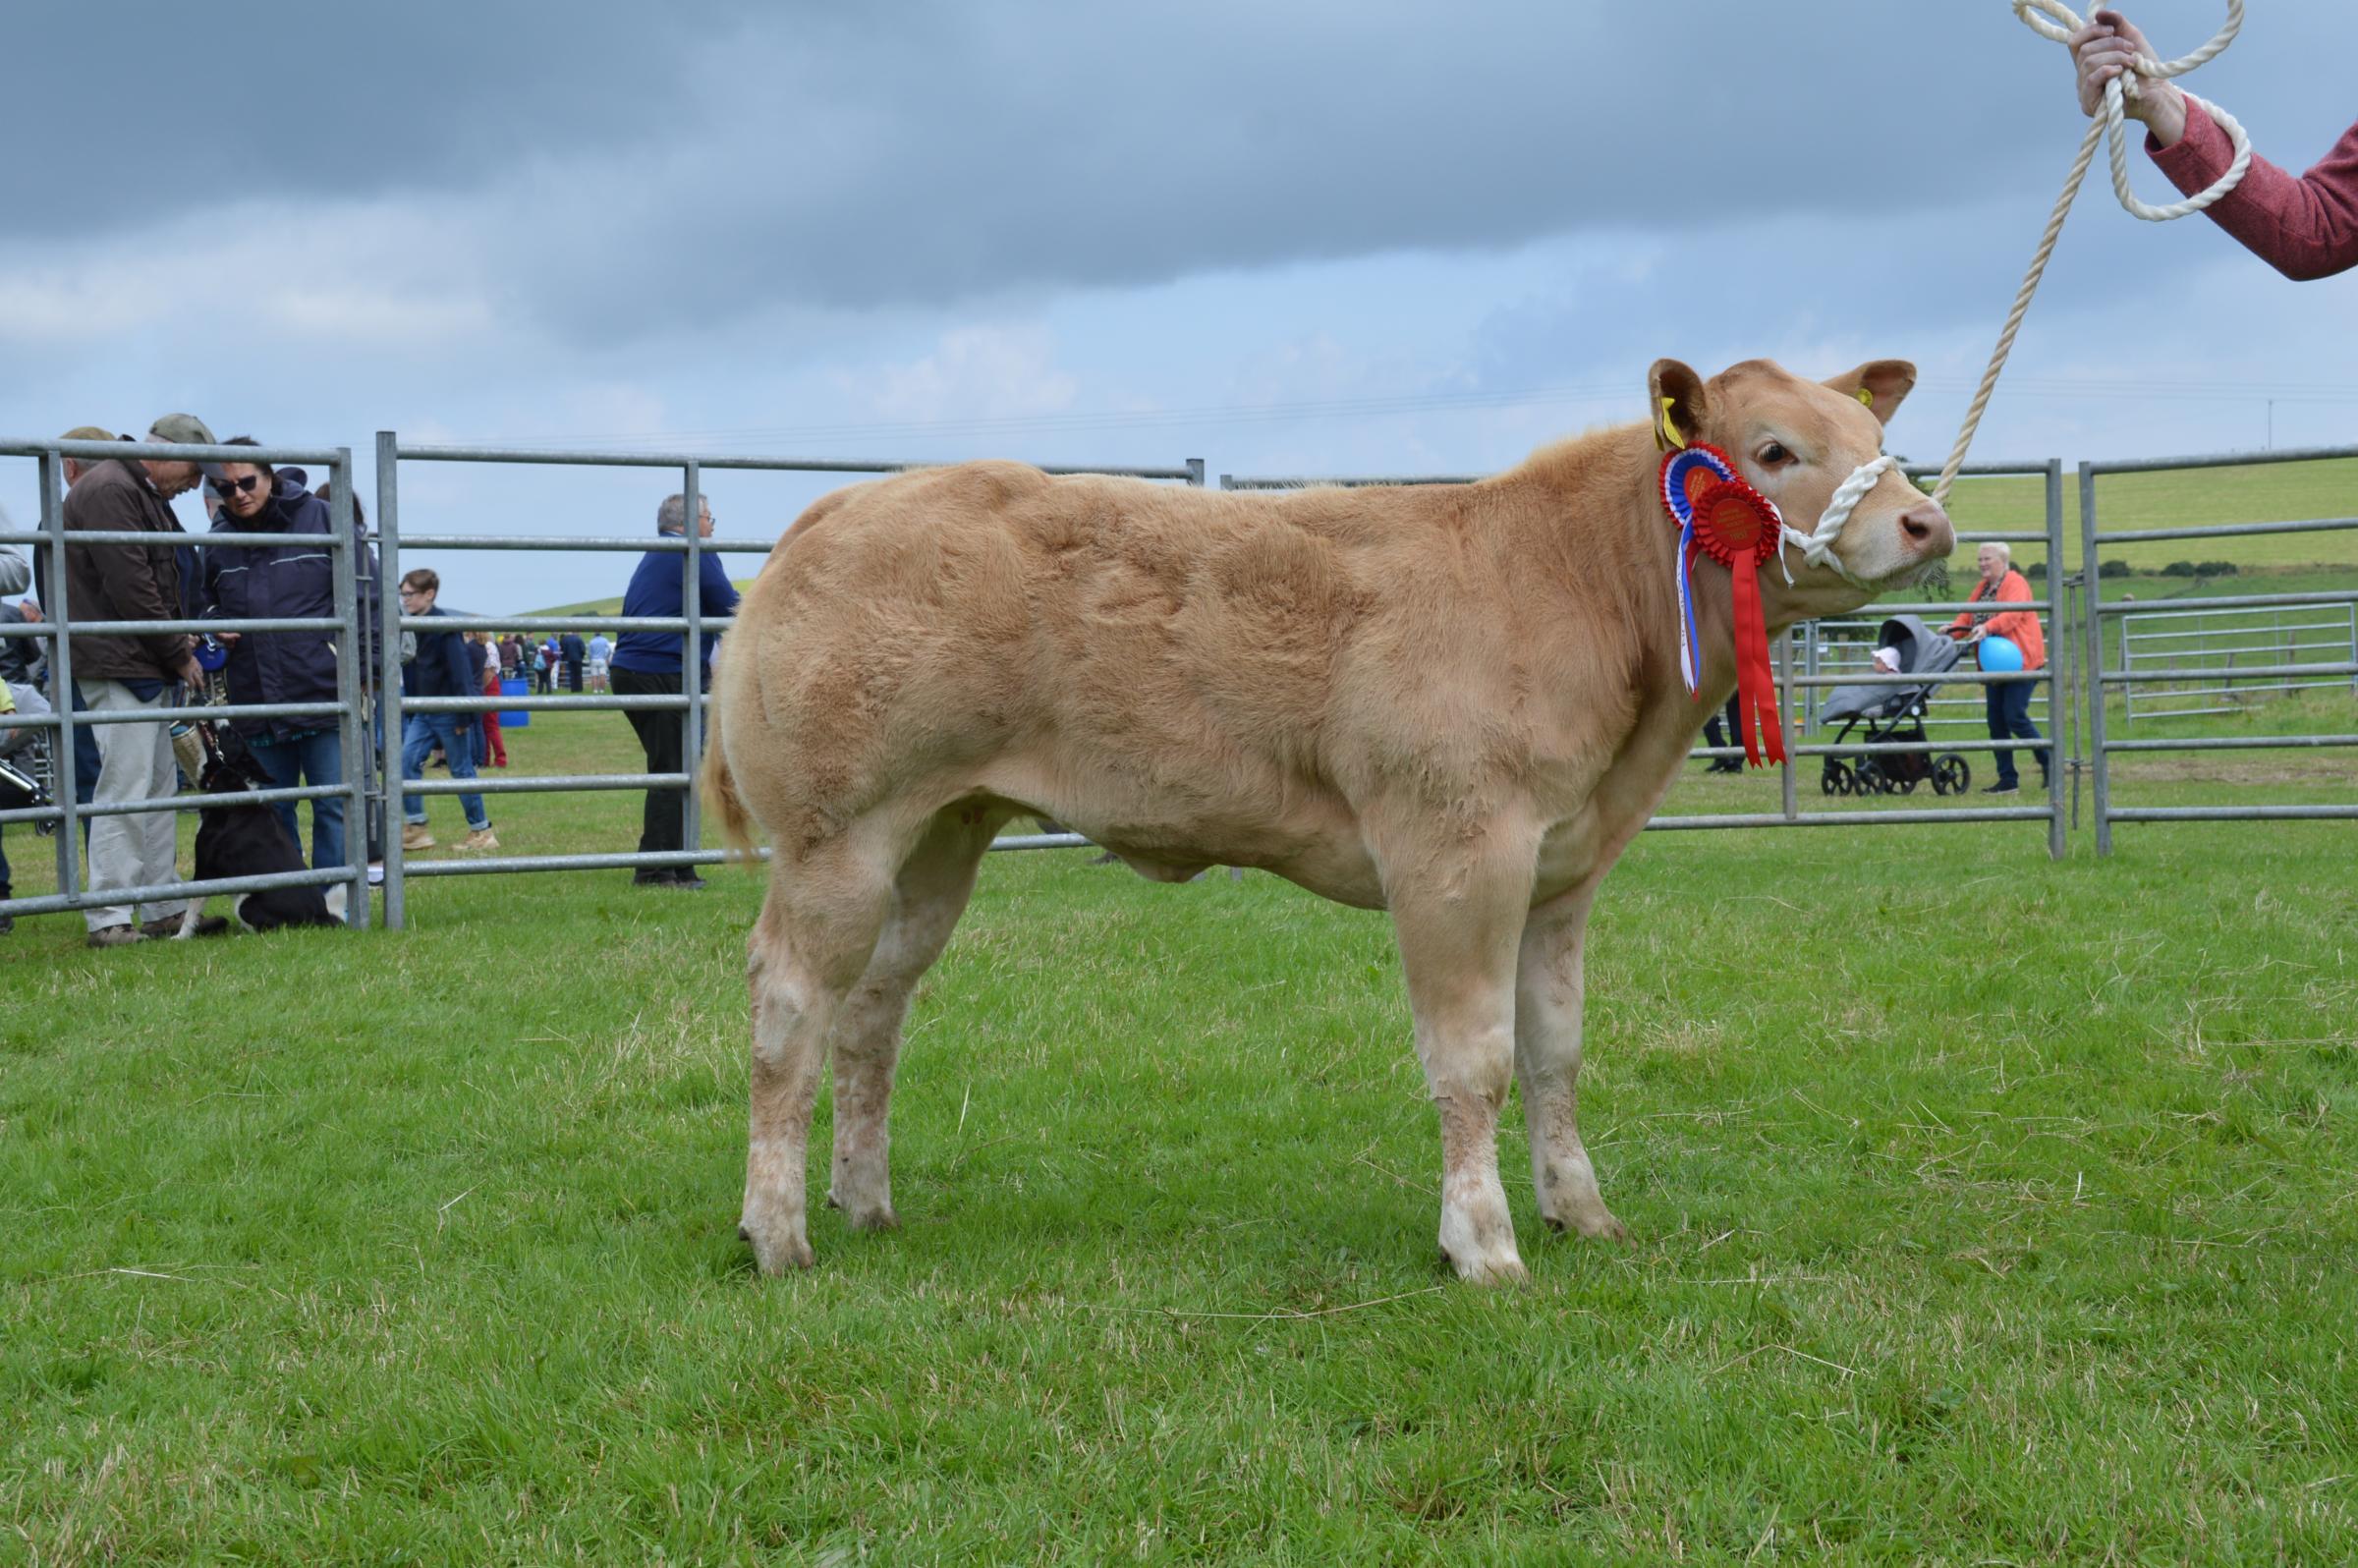 Duncan Semple produced the overall beef champion with this Charolais cross heifer 